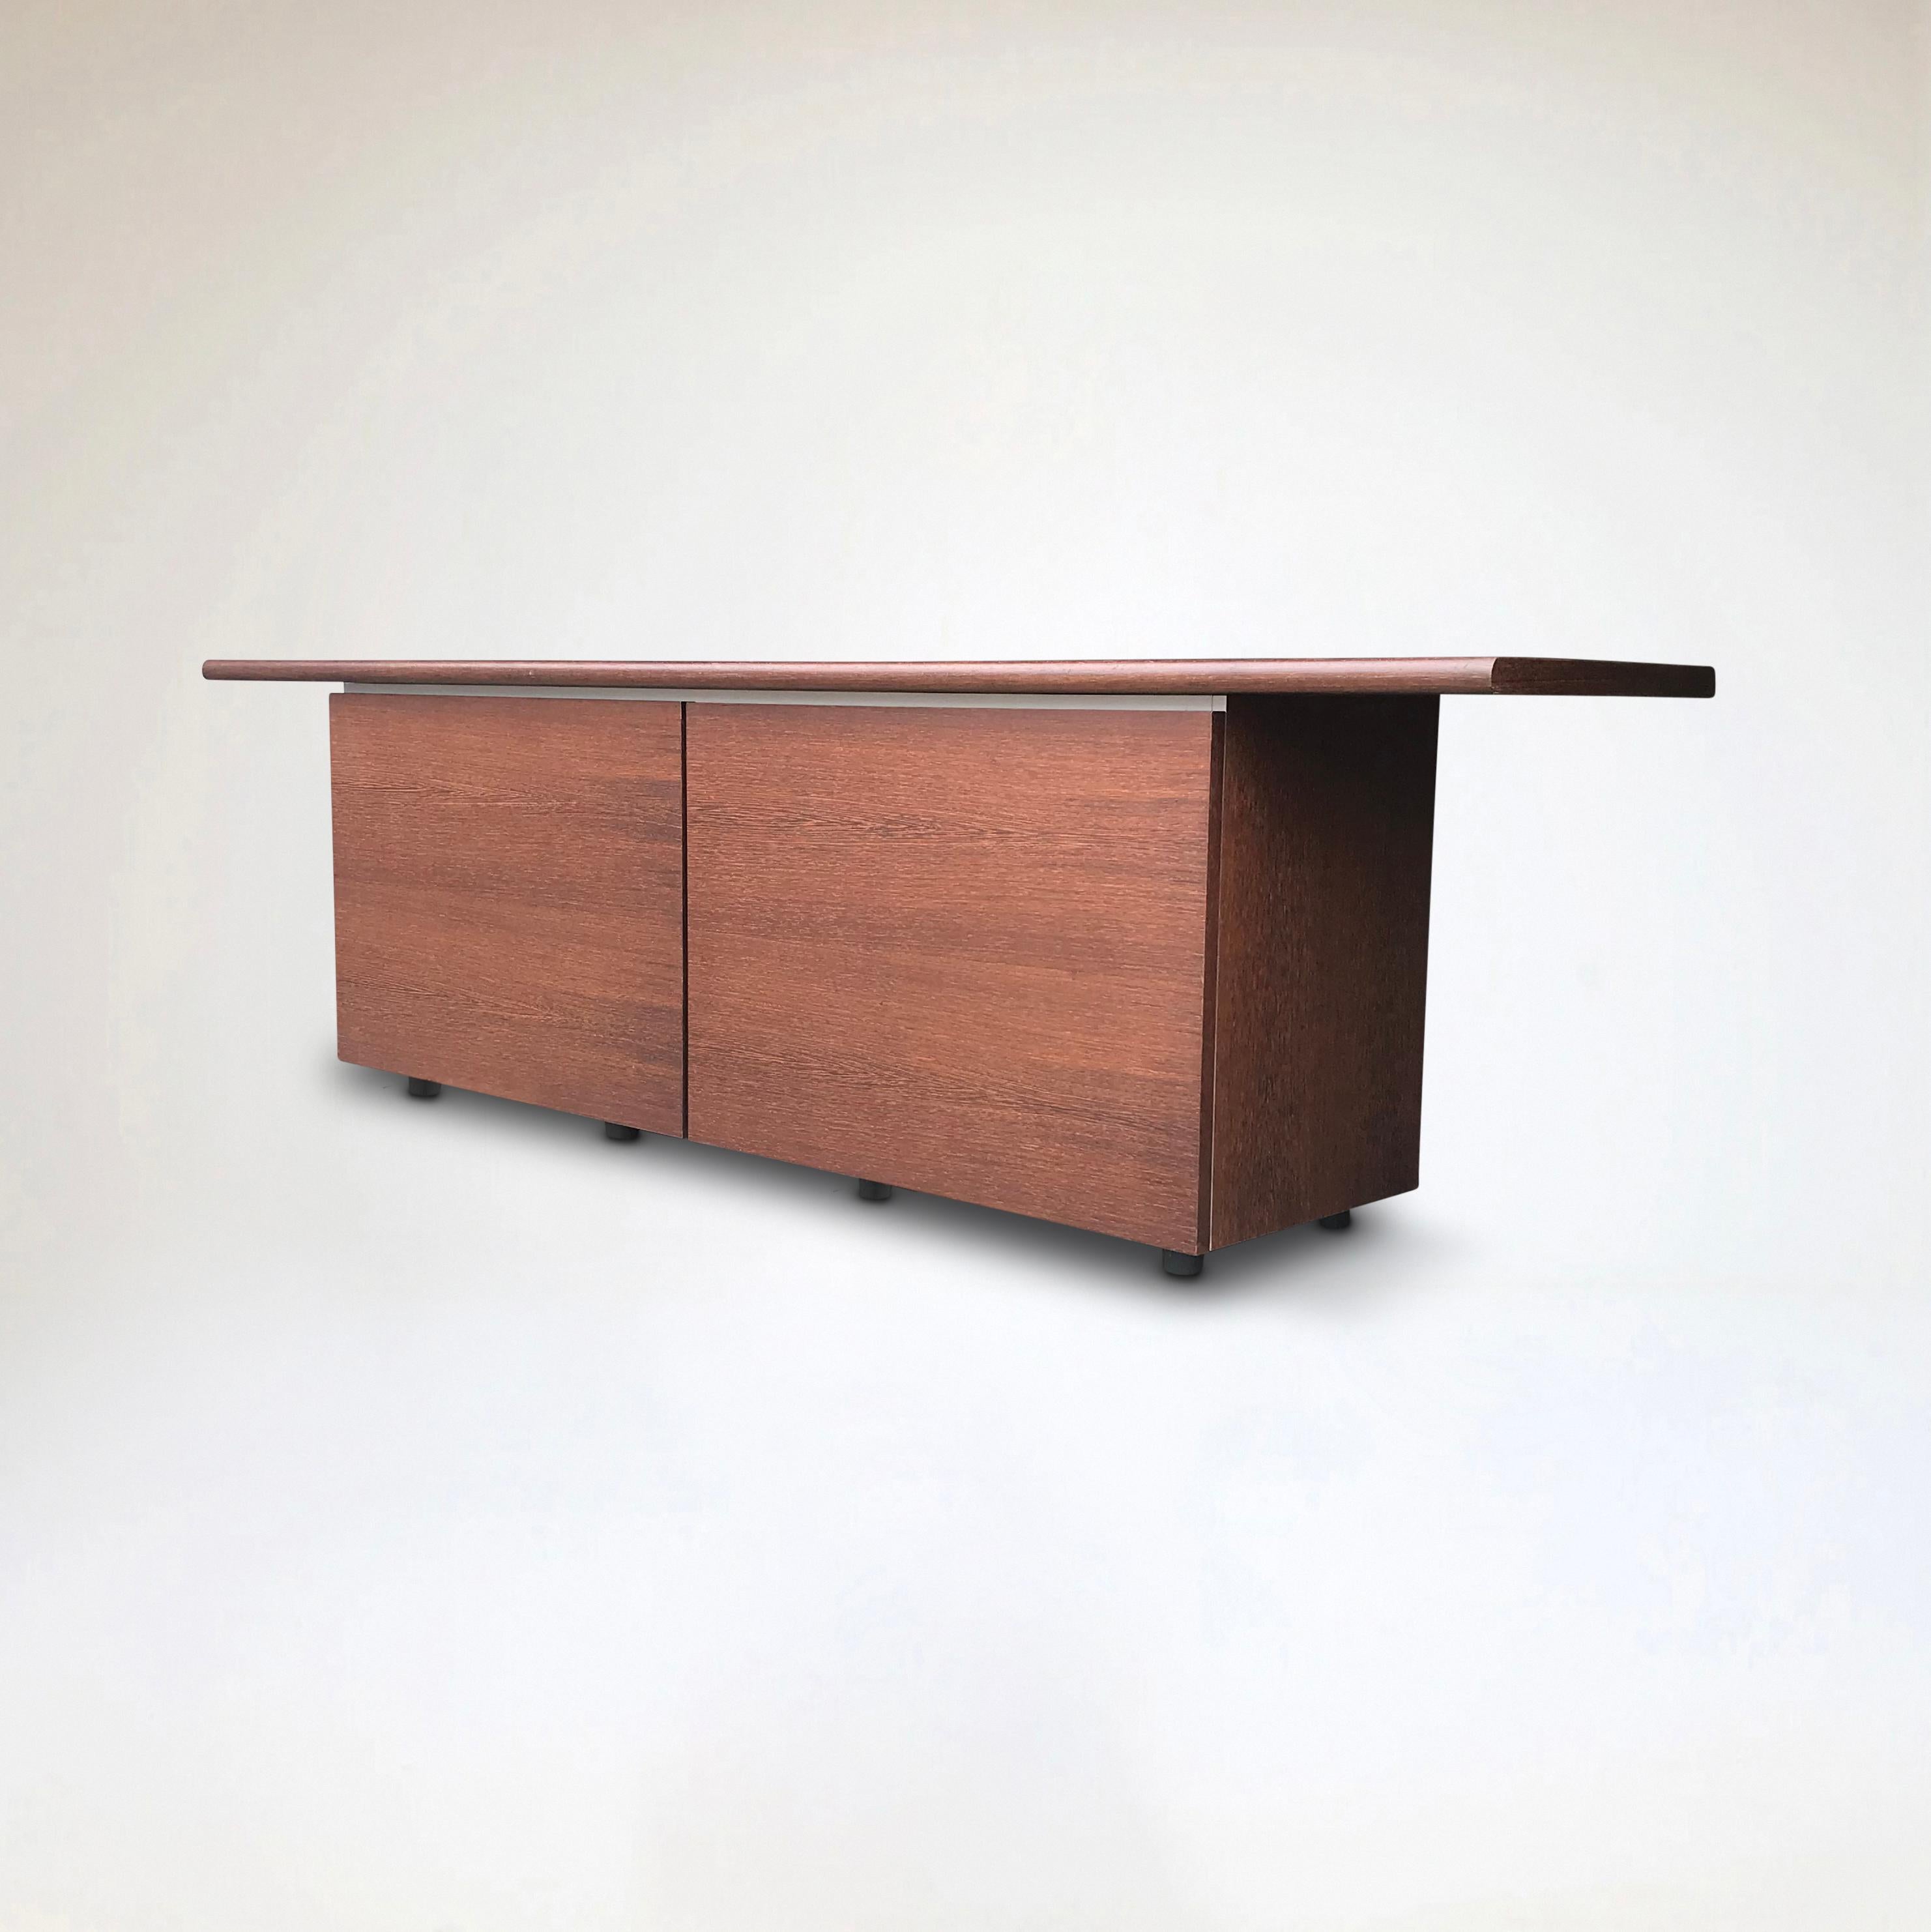 Impressive design from Giotto Stoppino dating from 1977, a postmodern interpretation on the Italian classic credenza design.

The Sheraton is characterized by its oversized top, sticking out clearly from the body and providing lots of stance. The